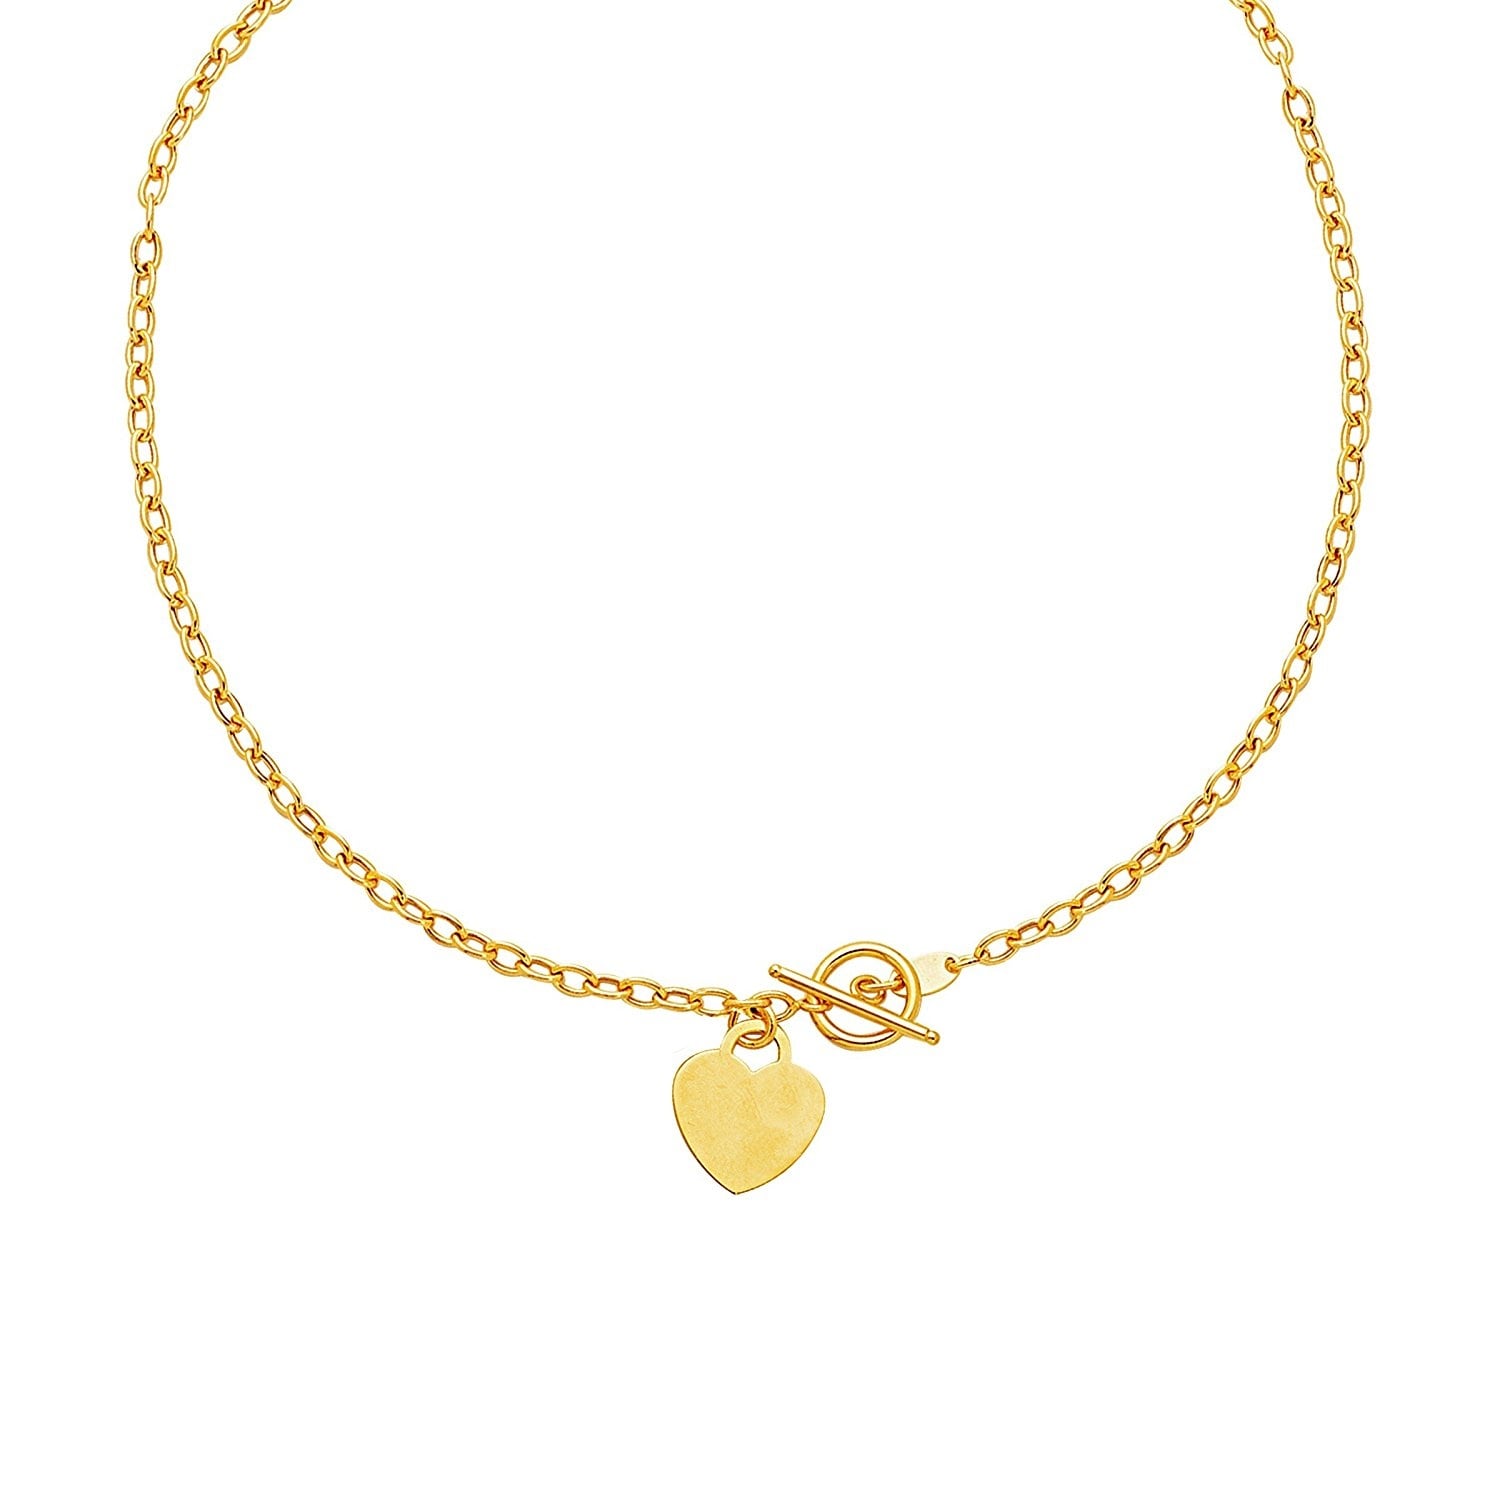 Download Mcs Jewelry Inc 14 Karat Yellow Gold Heart Dangling Charm Necklace 17 Inches Overstock 18090532